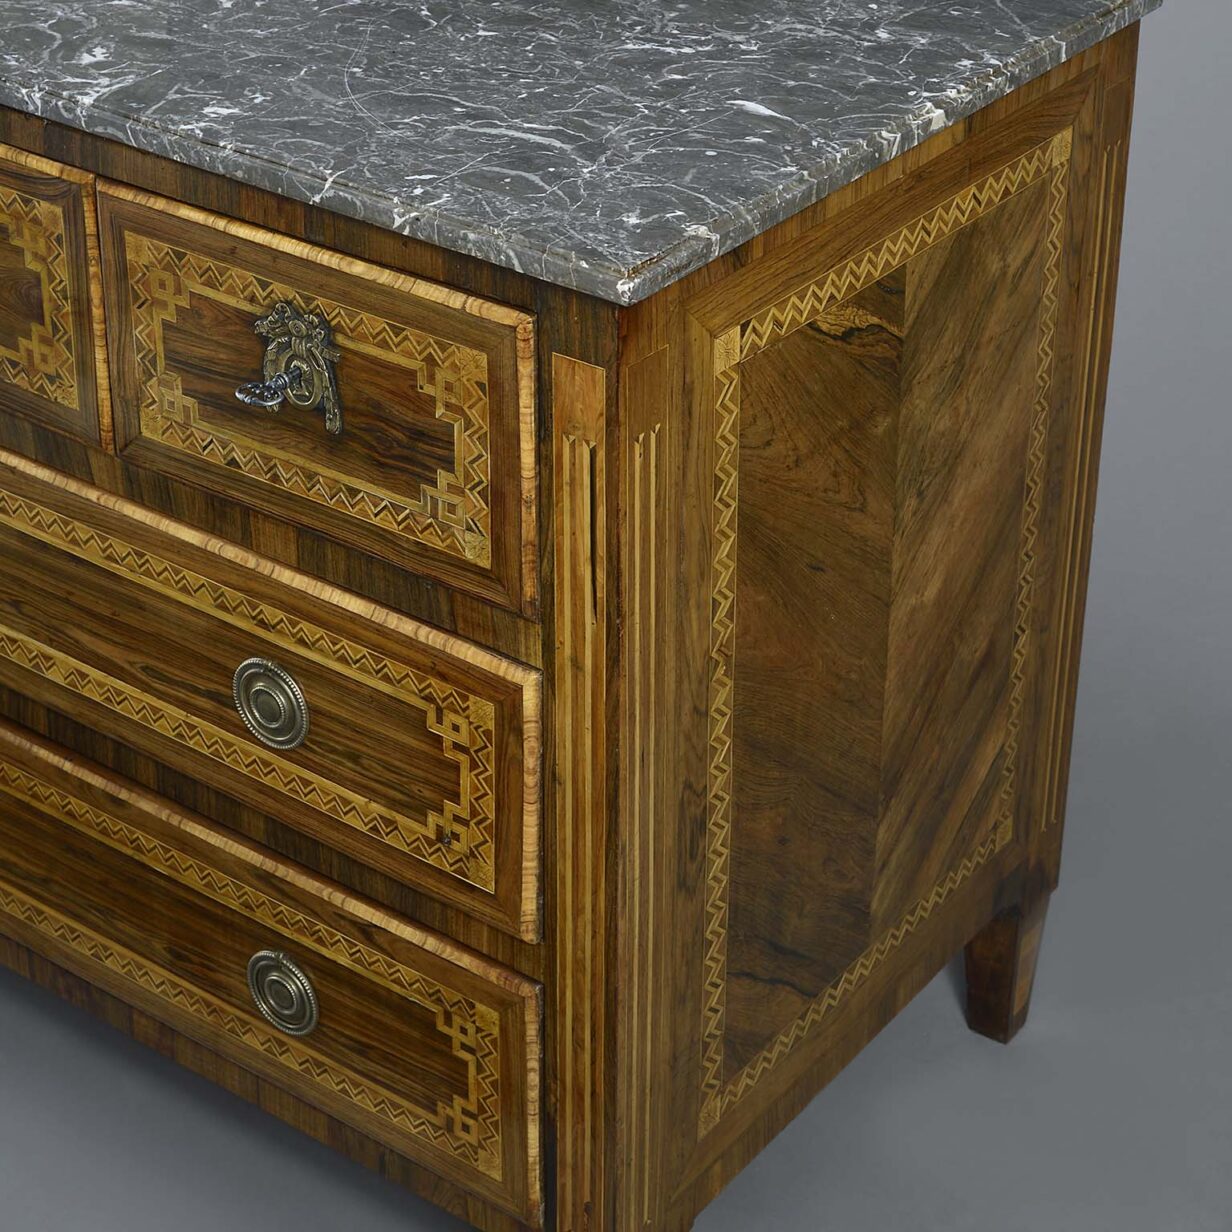 Late 18th century parquetry commode